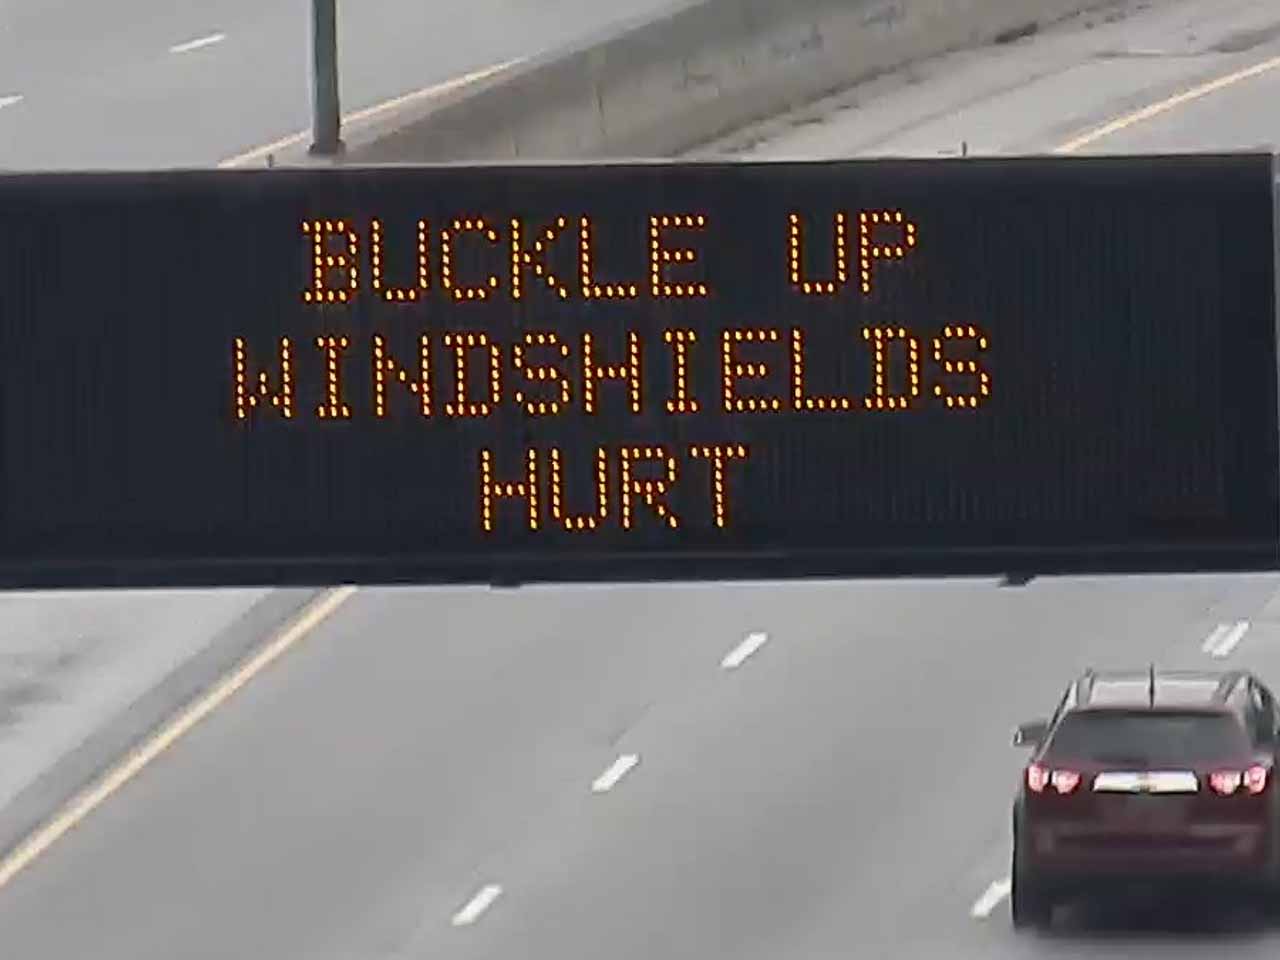 Feds Ban Funny Highway Signs - A Funny Sign That Says Bike Up Windshields Hurt.